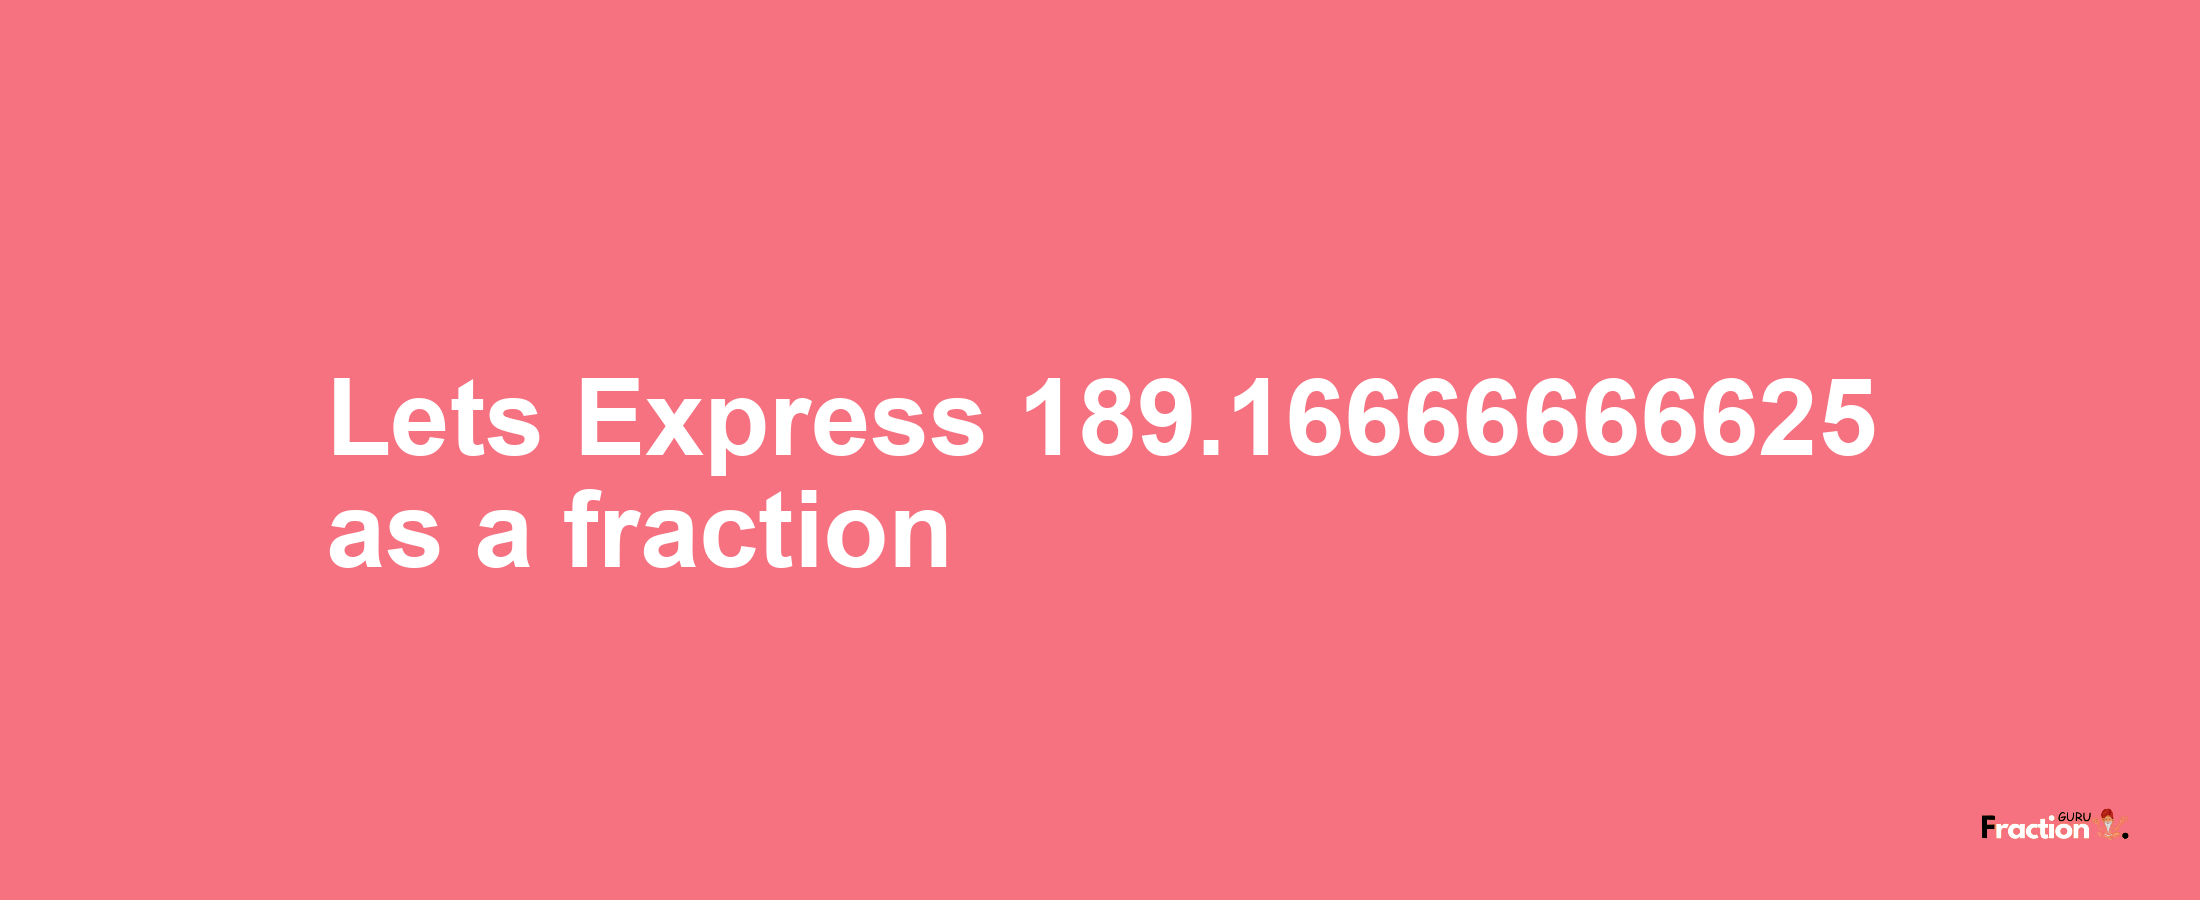 Lets Express 189.16666666625 as afraction